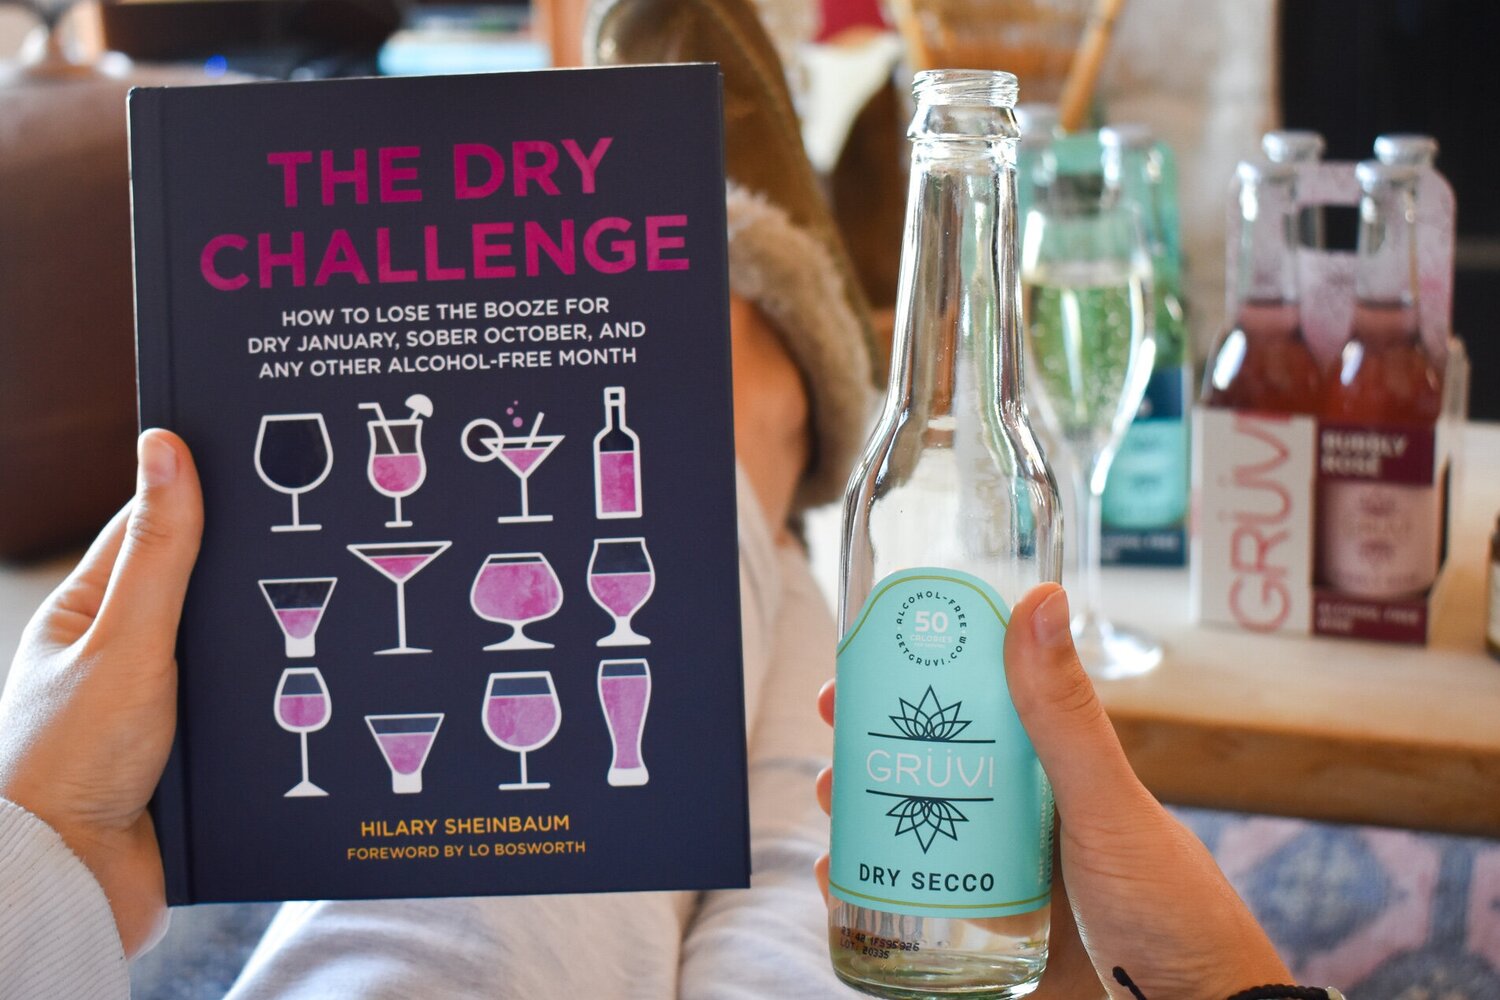 How A Silly New Year’s Bet Inspired The Dry Challenge Book